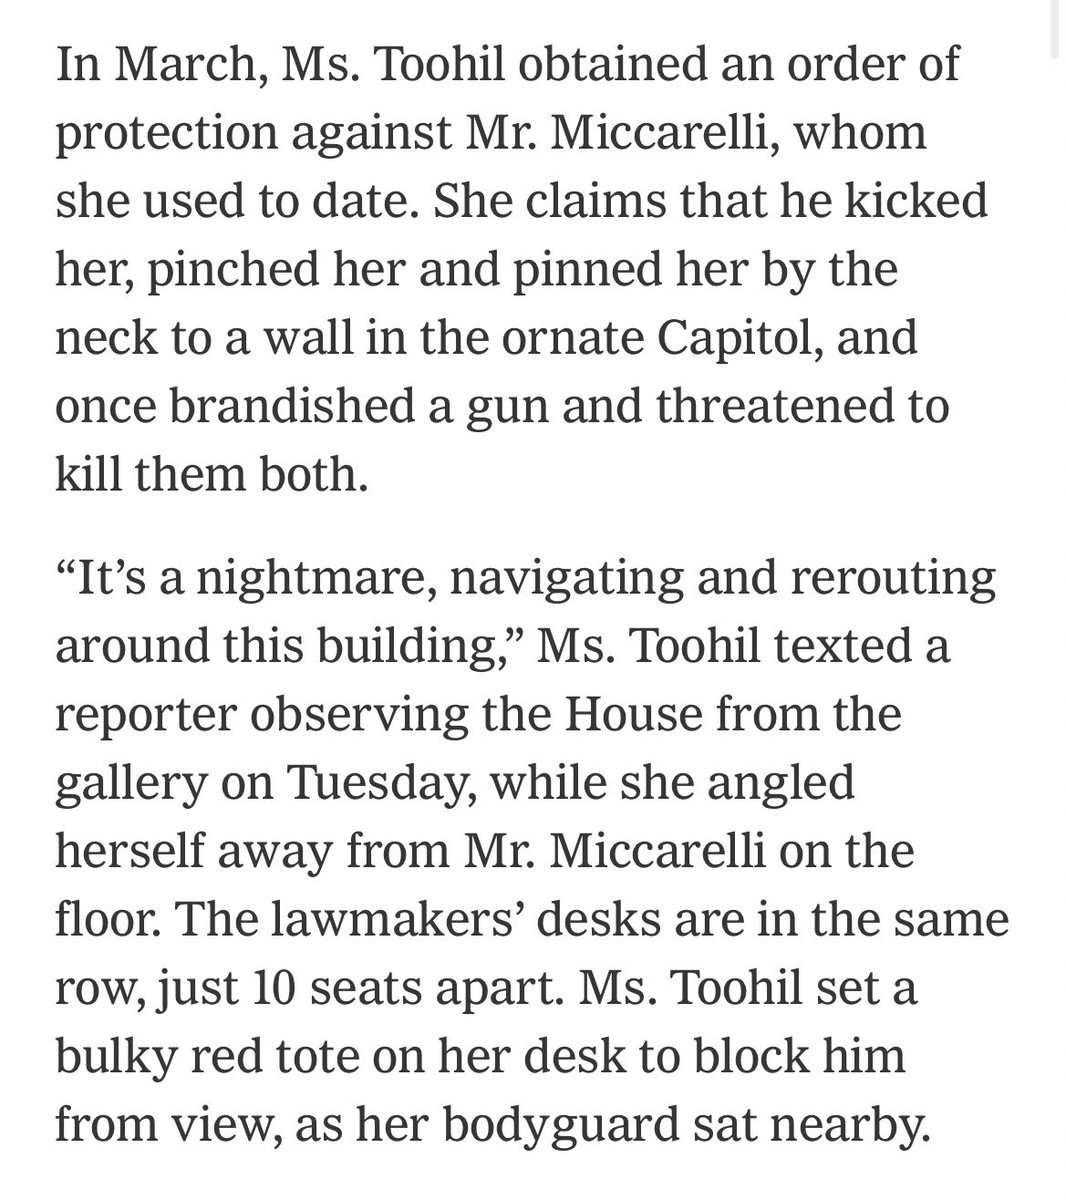 This from the caucus where a female member had to get a bodyguard because she was forced to work and vote alongside her abuser, despite having a protective order, for weeks.